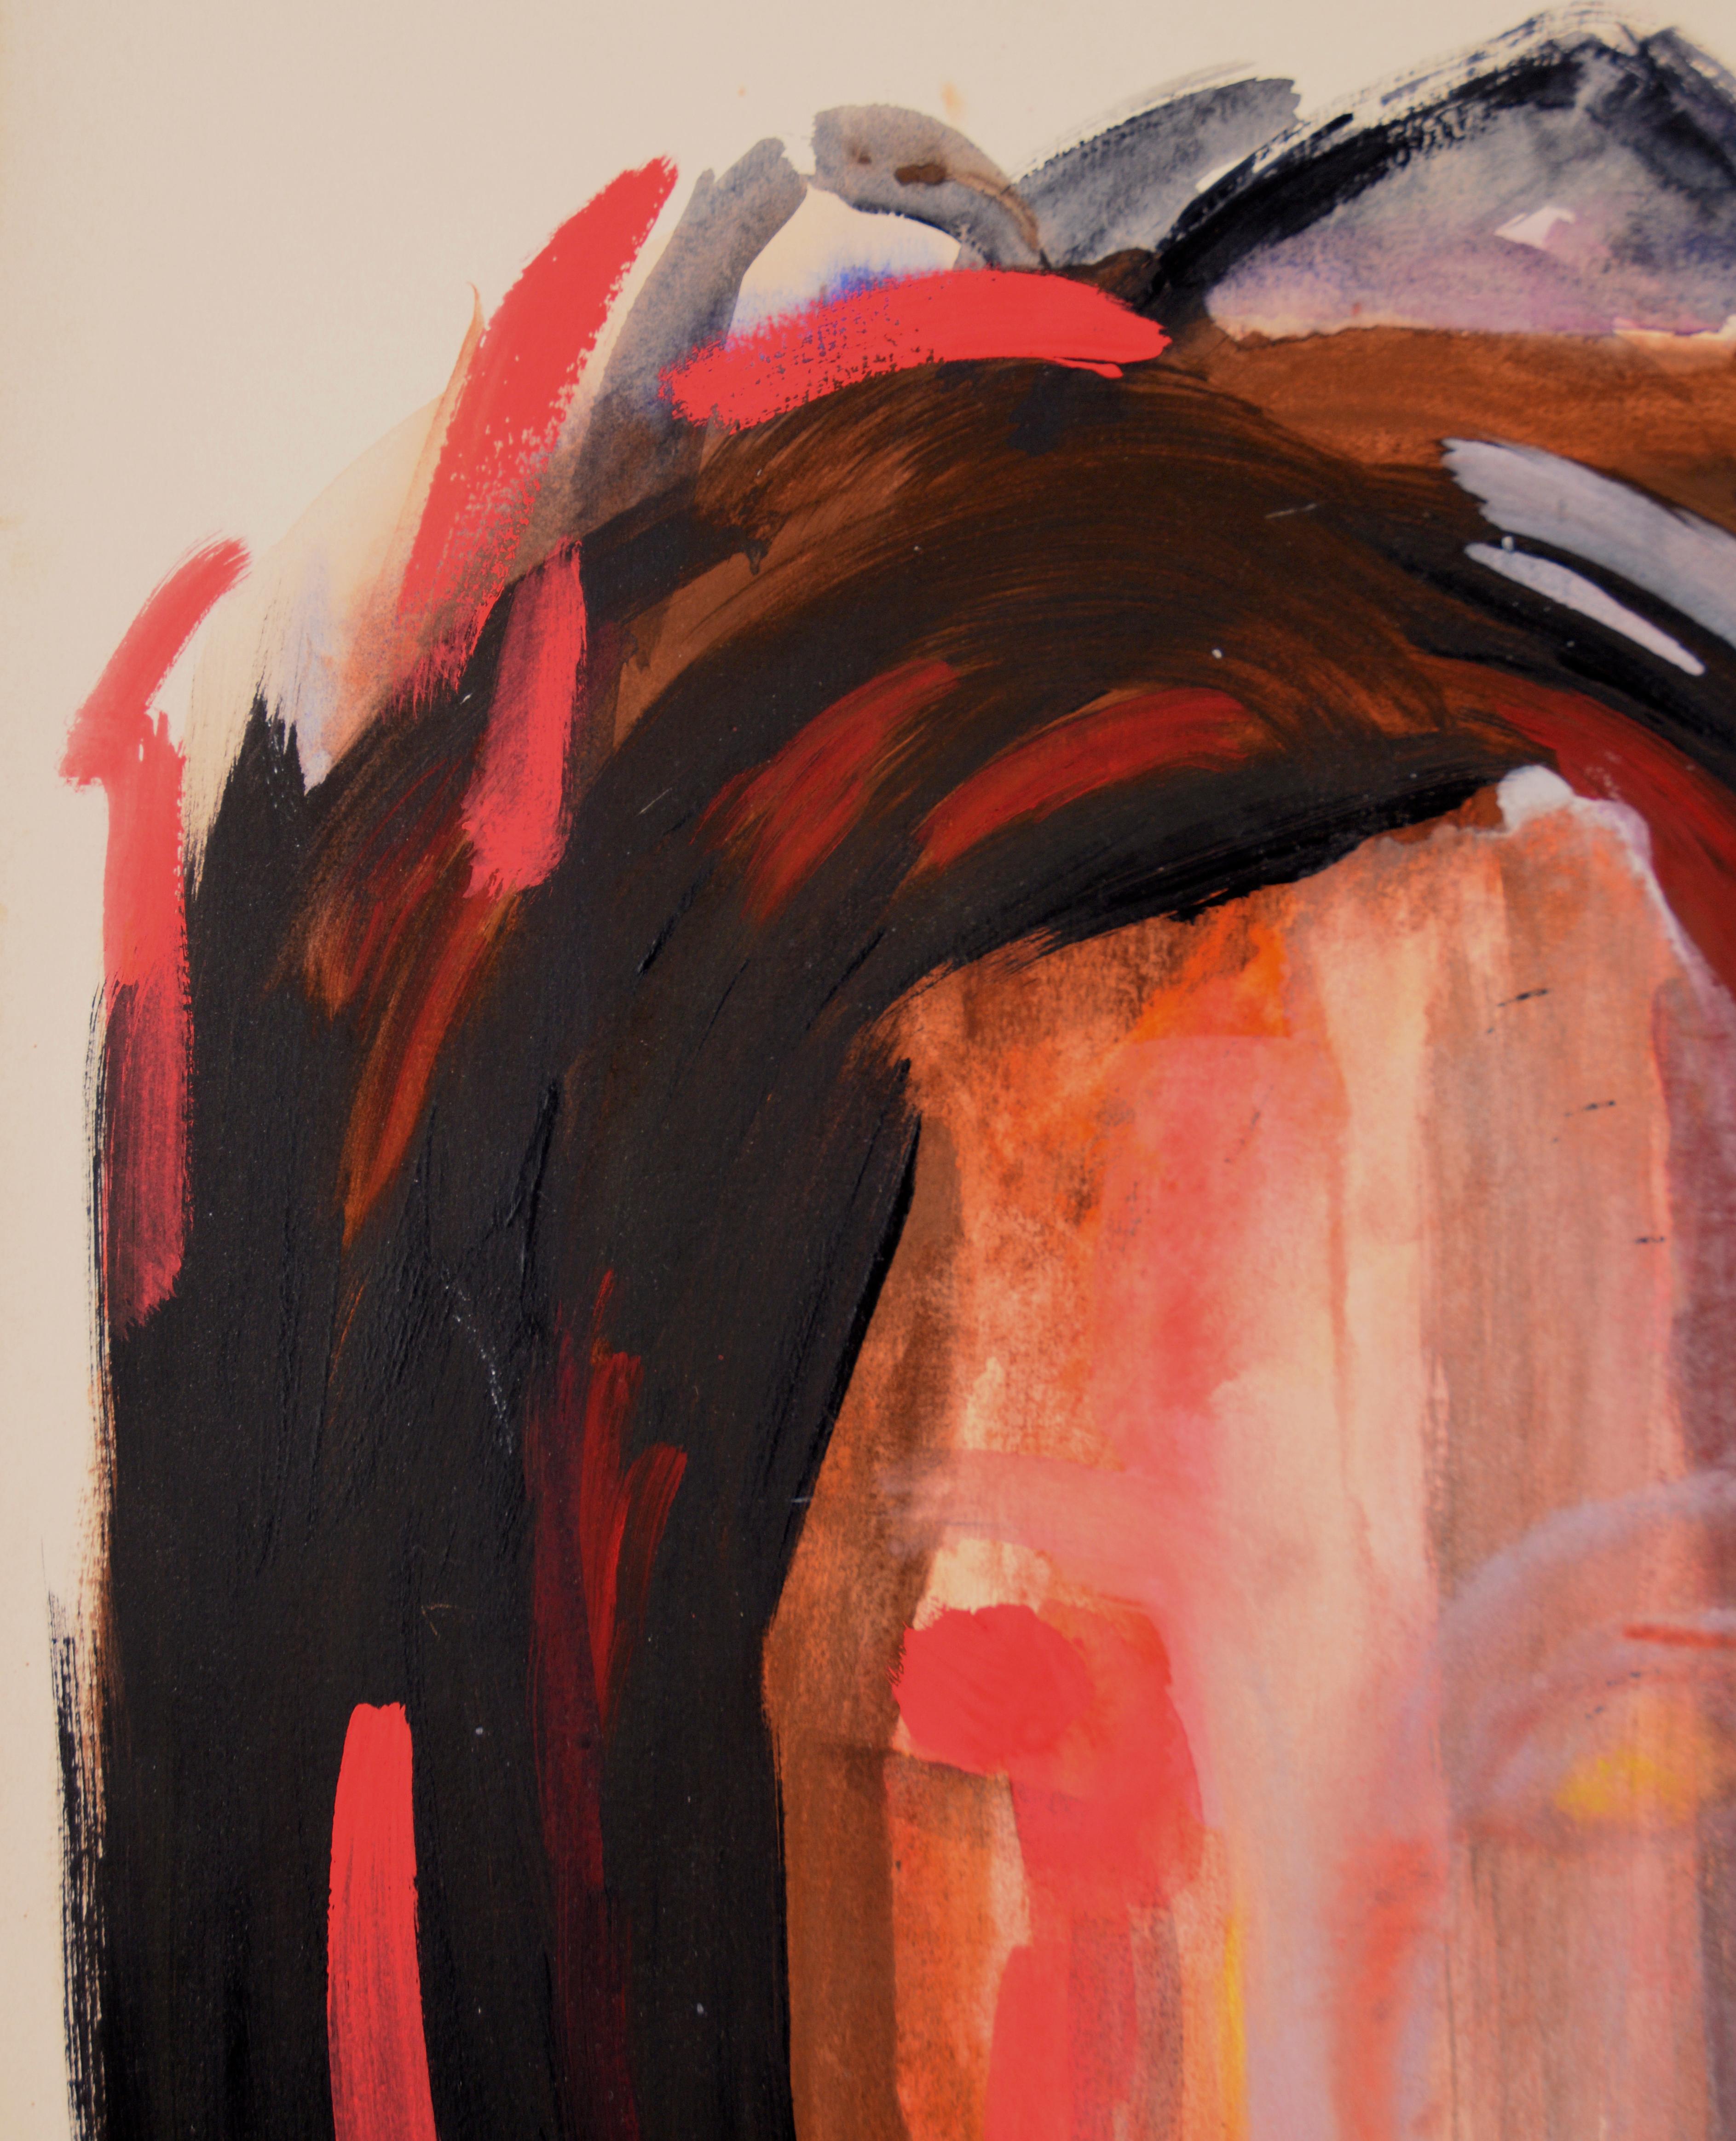 Abstract Portrait of a Woman in Gouache on Paper - Abstract Expressionist Art by Ricardo de Silva